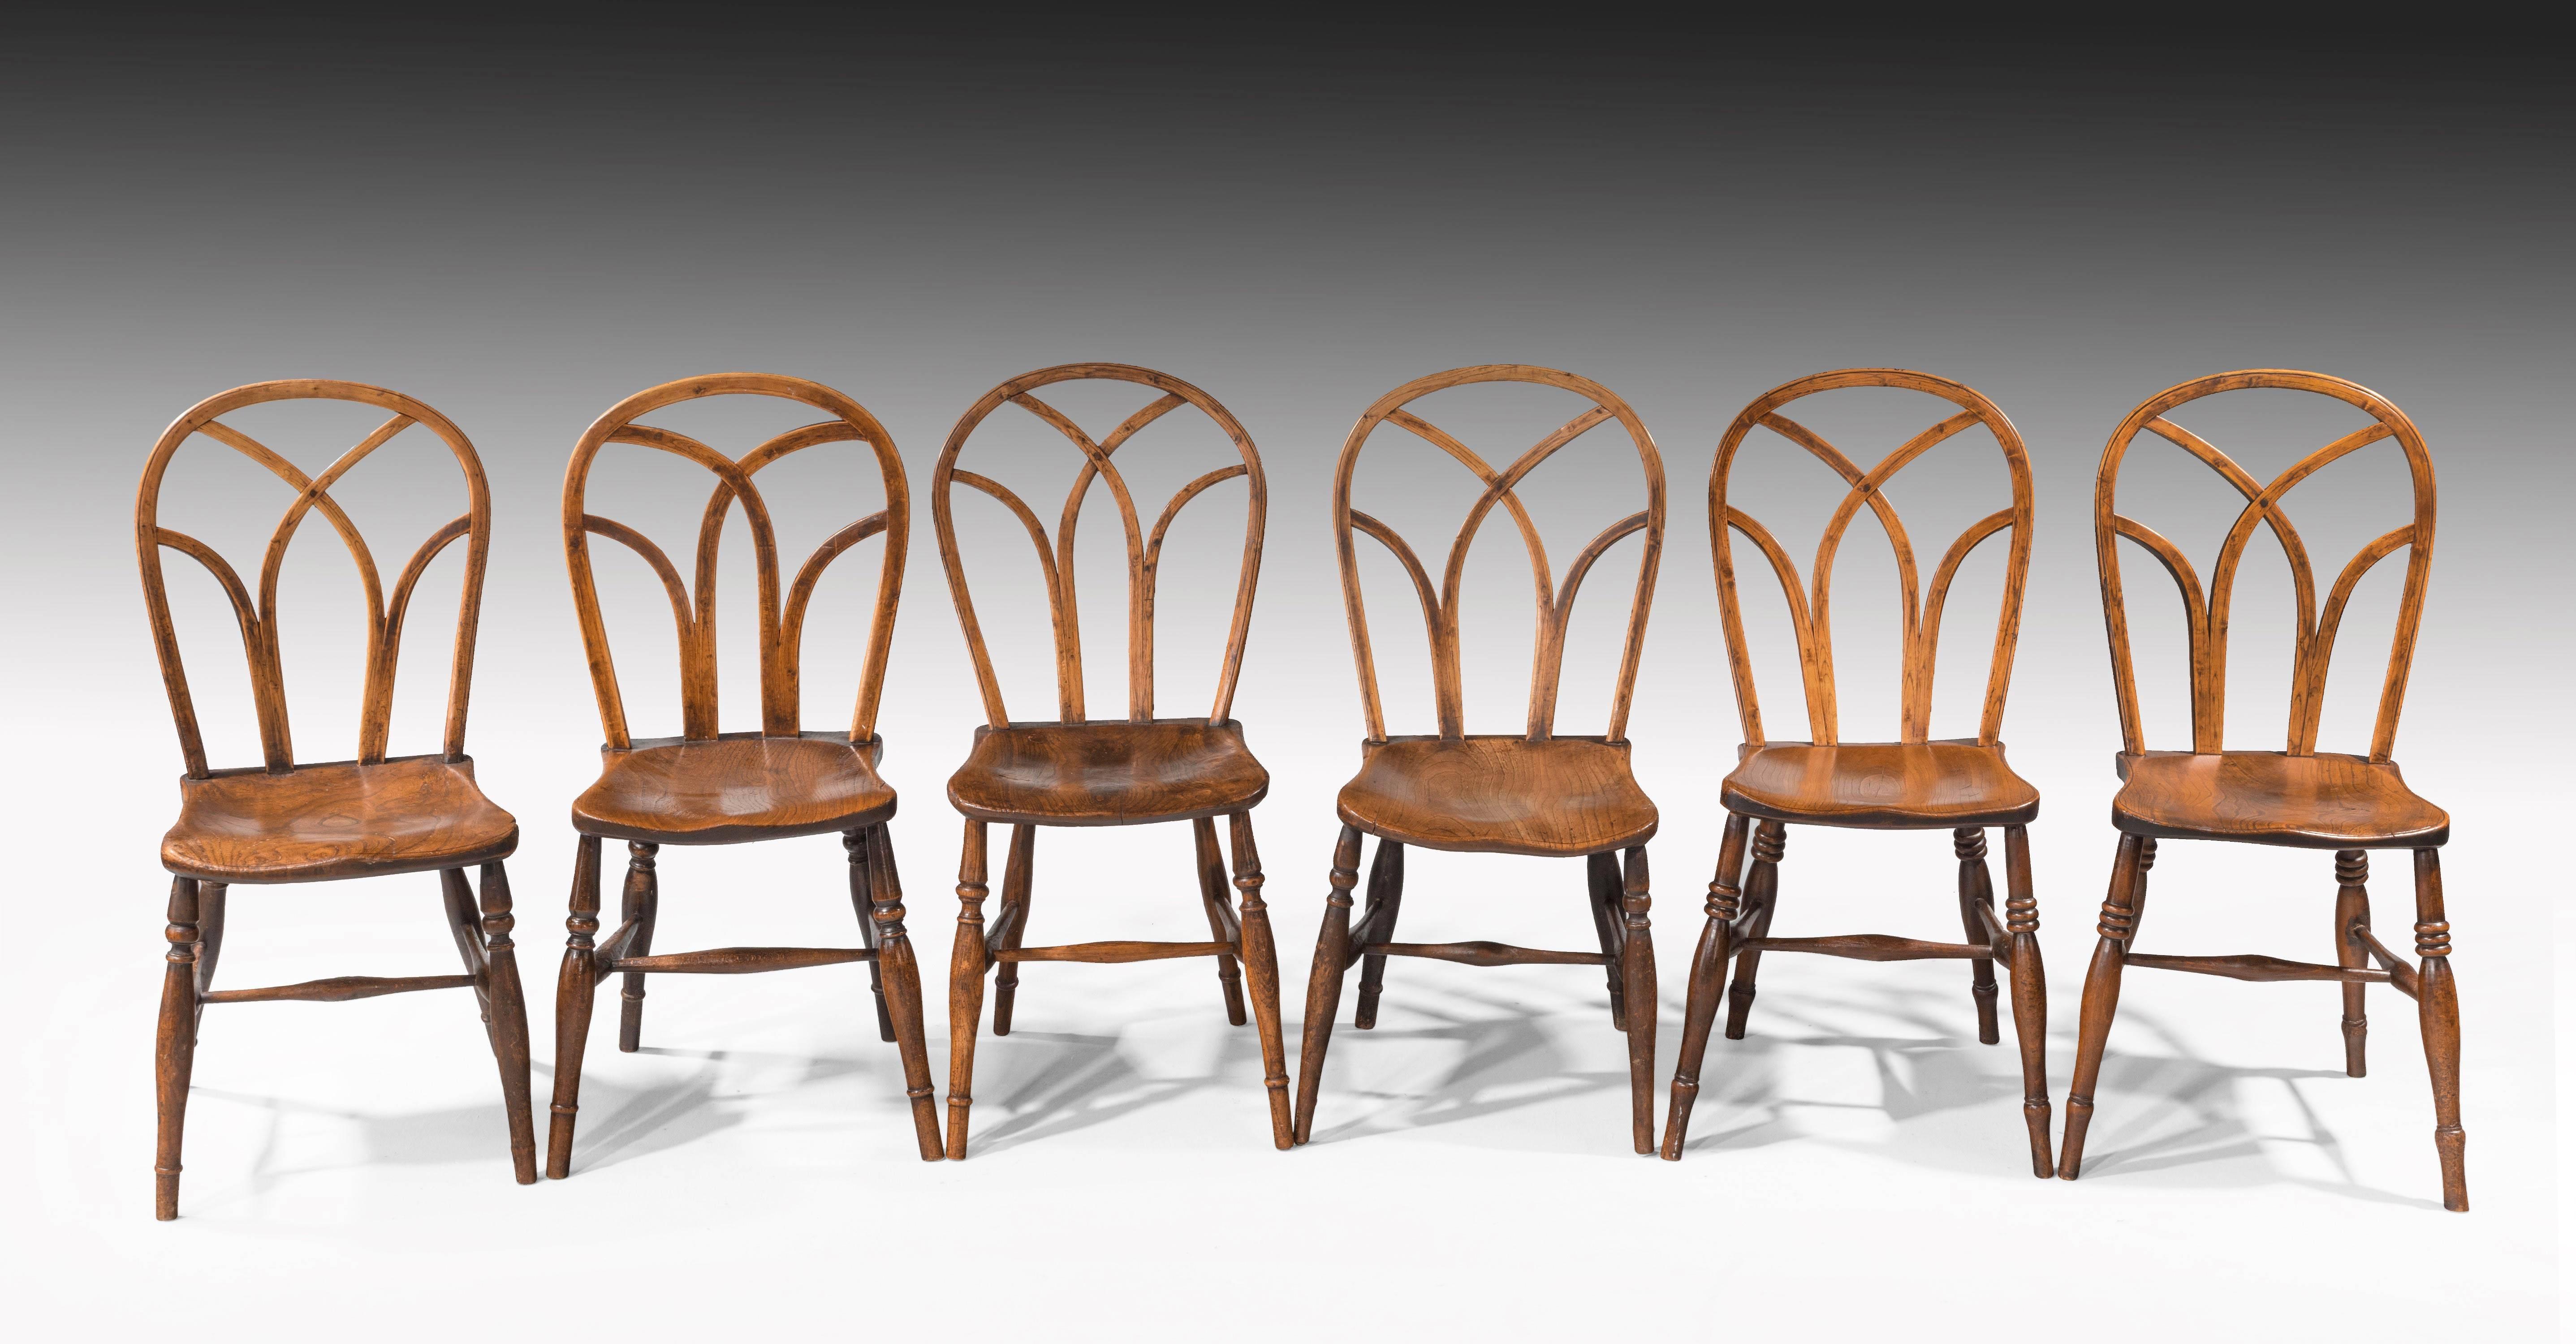 A finely drawn set of eight (six plus two) ash, elm and beech Gothic windsor chairs from Buckinghamshire region of the UK. Particularly elegant lines. Fine original patina.

The single chairs -

Height 35 inches
Width 15.5 inches
Depth 15